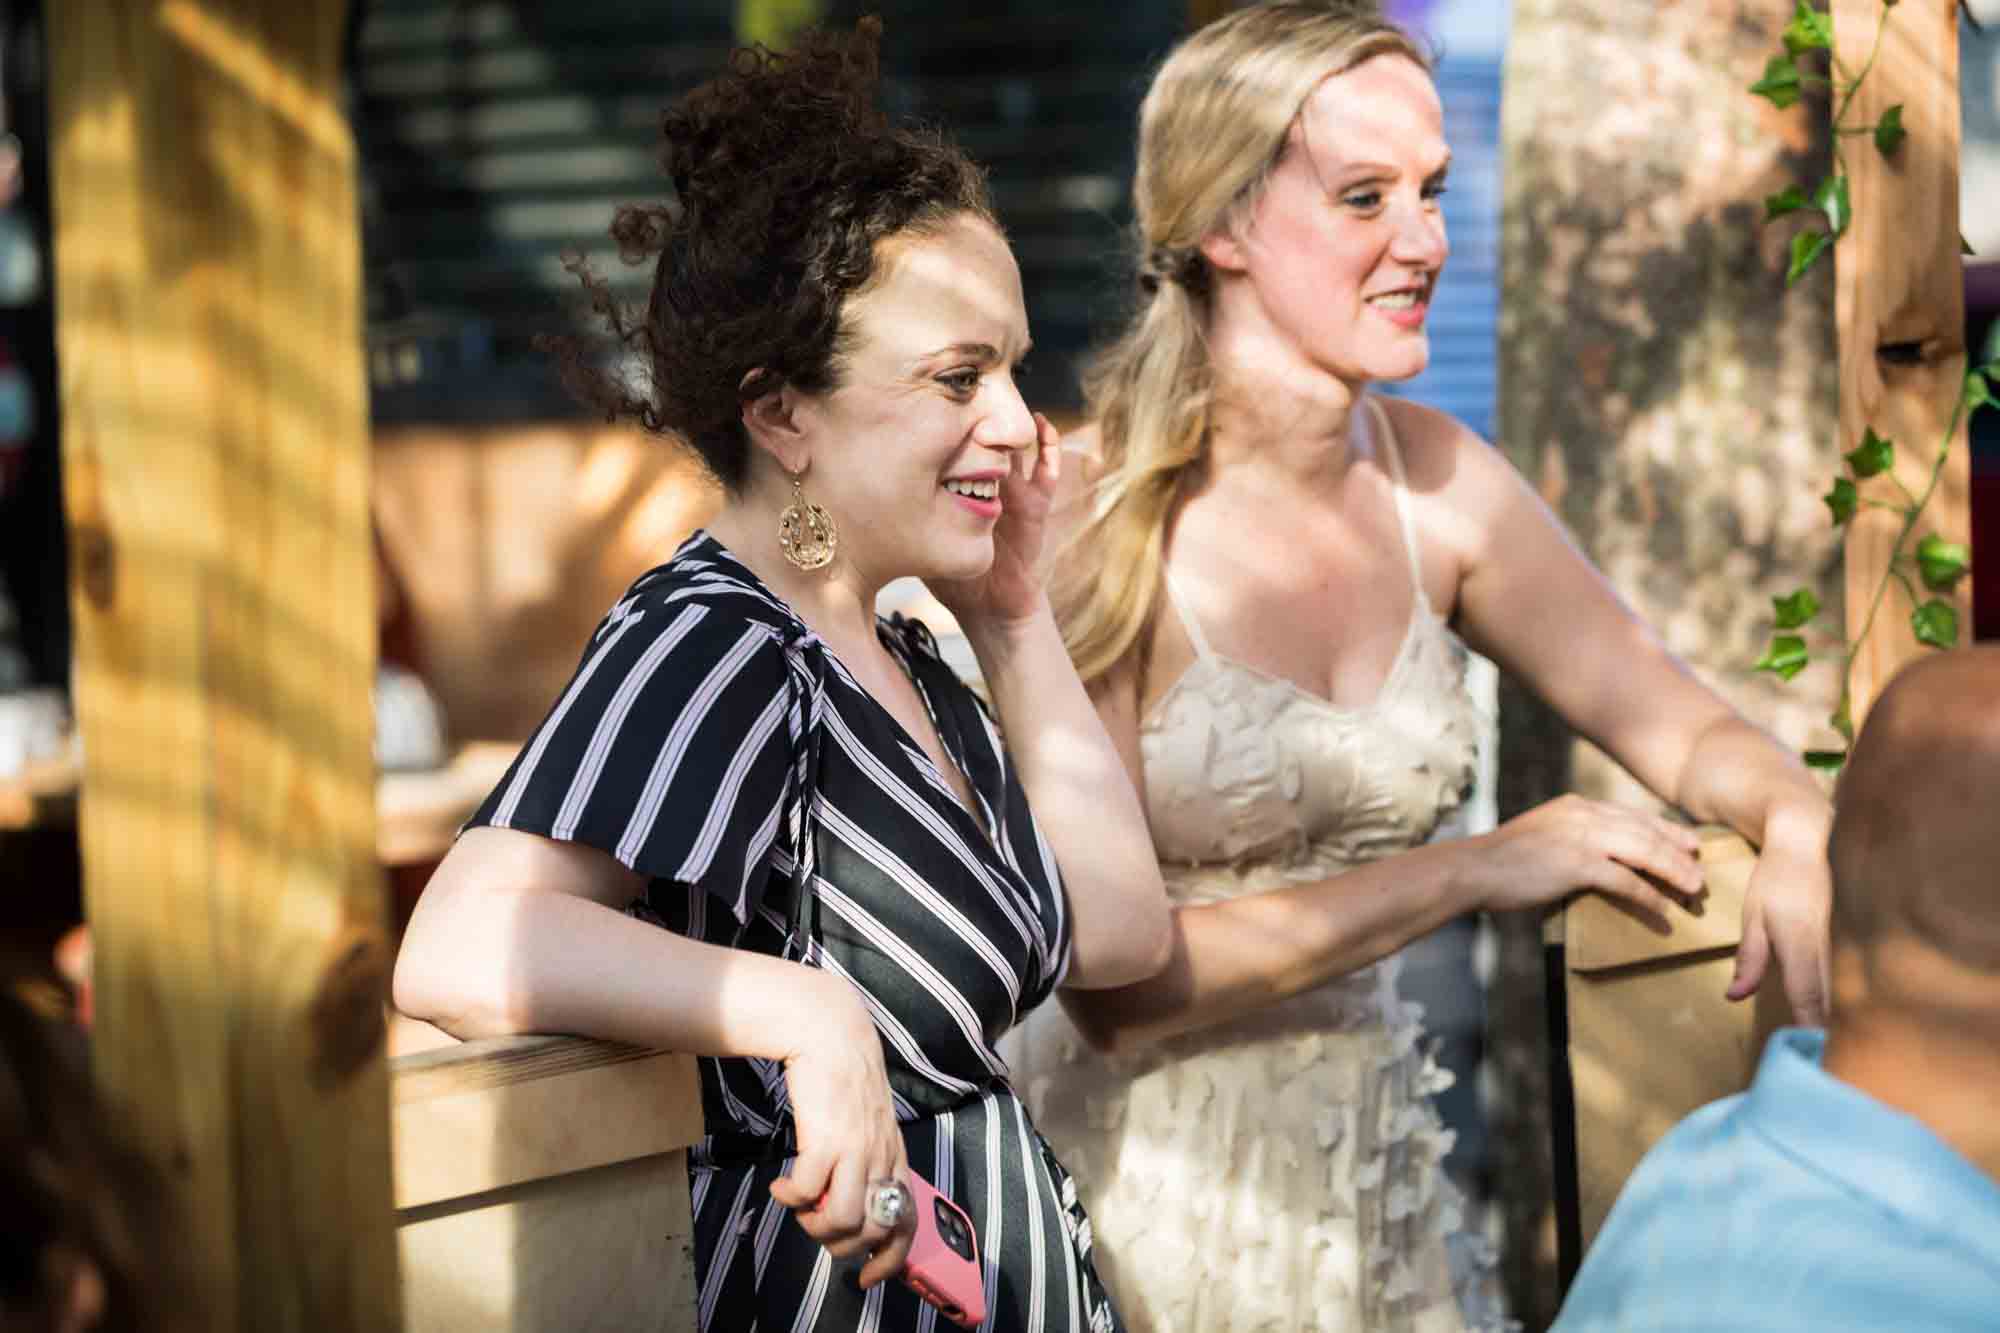 Two women laughing and talking during rehearsal dinner at an outdoor restaurant